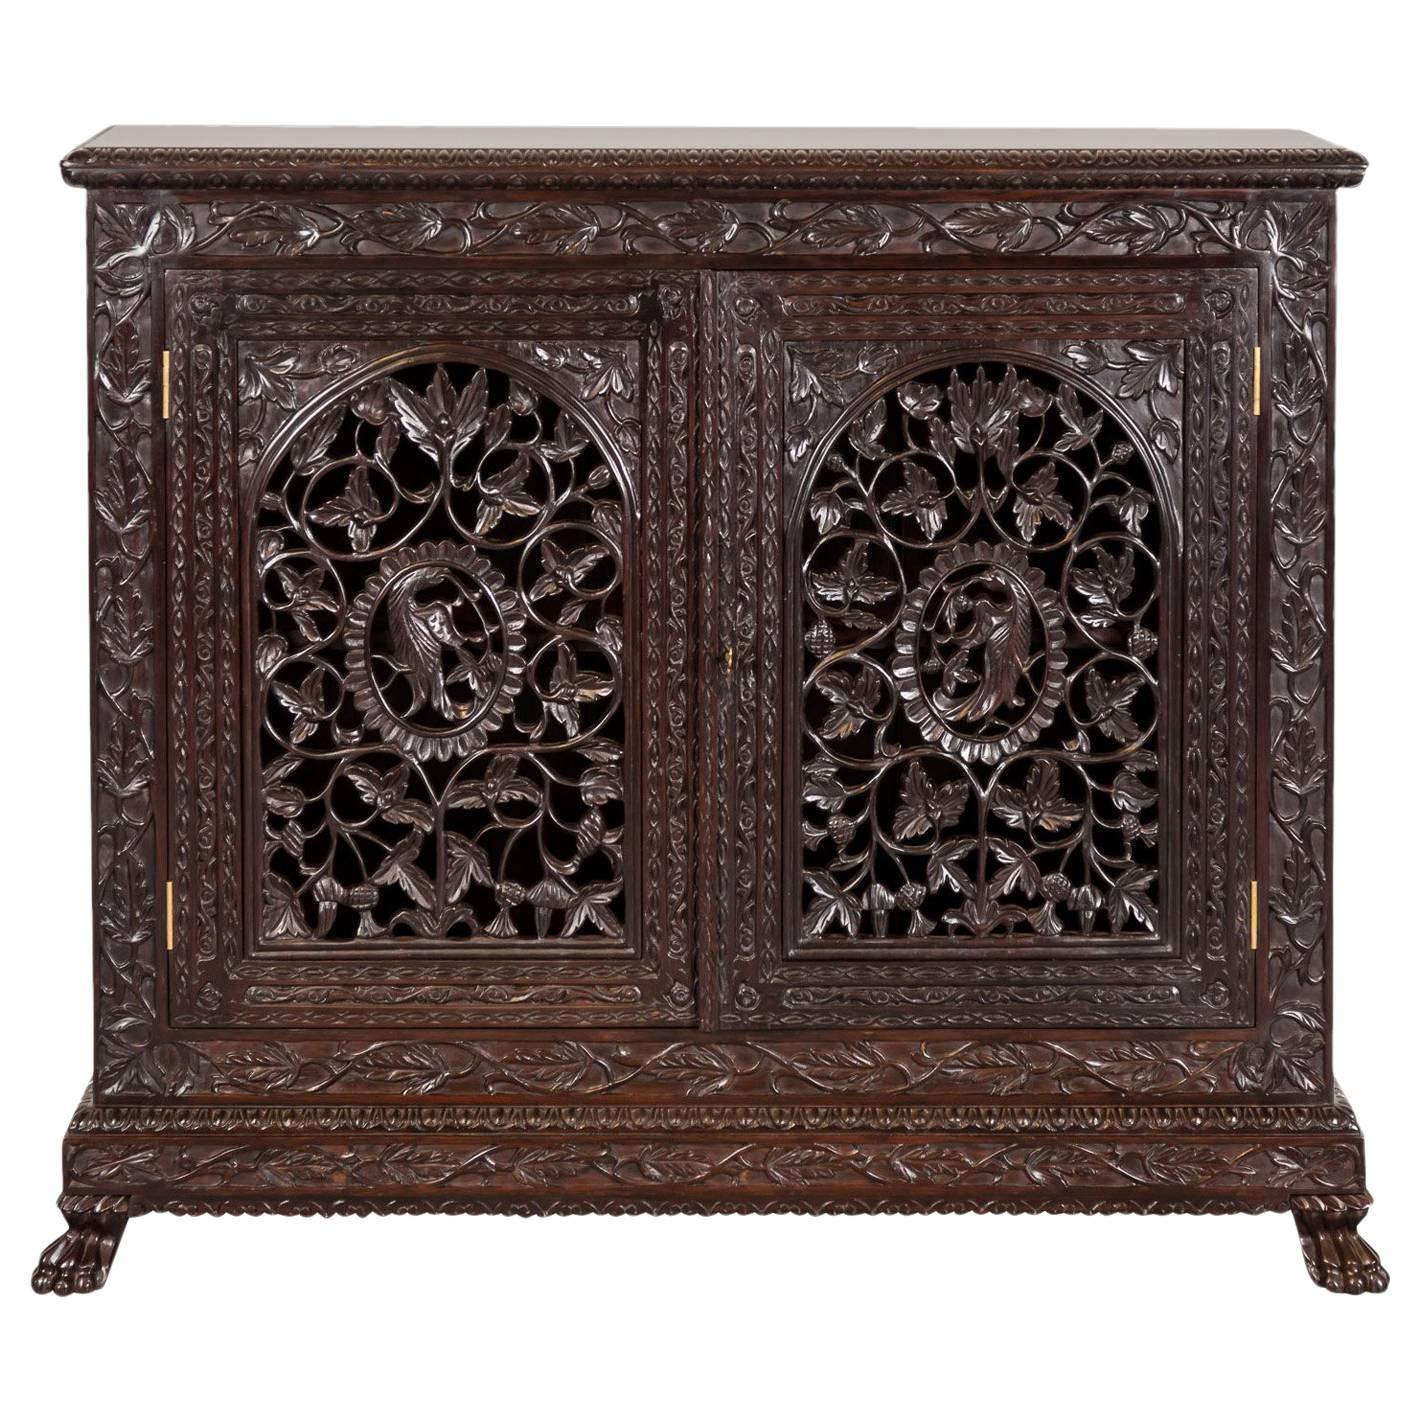 Antique Anglo-Indian or British Colonial Rosewood Cabinet For Sale